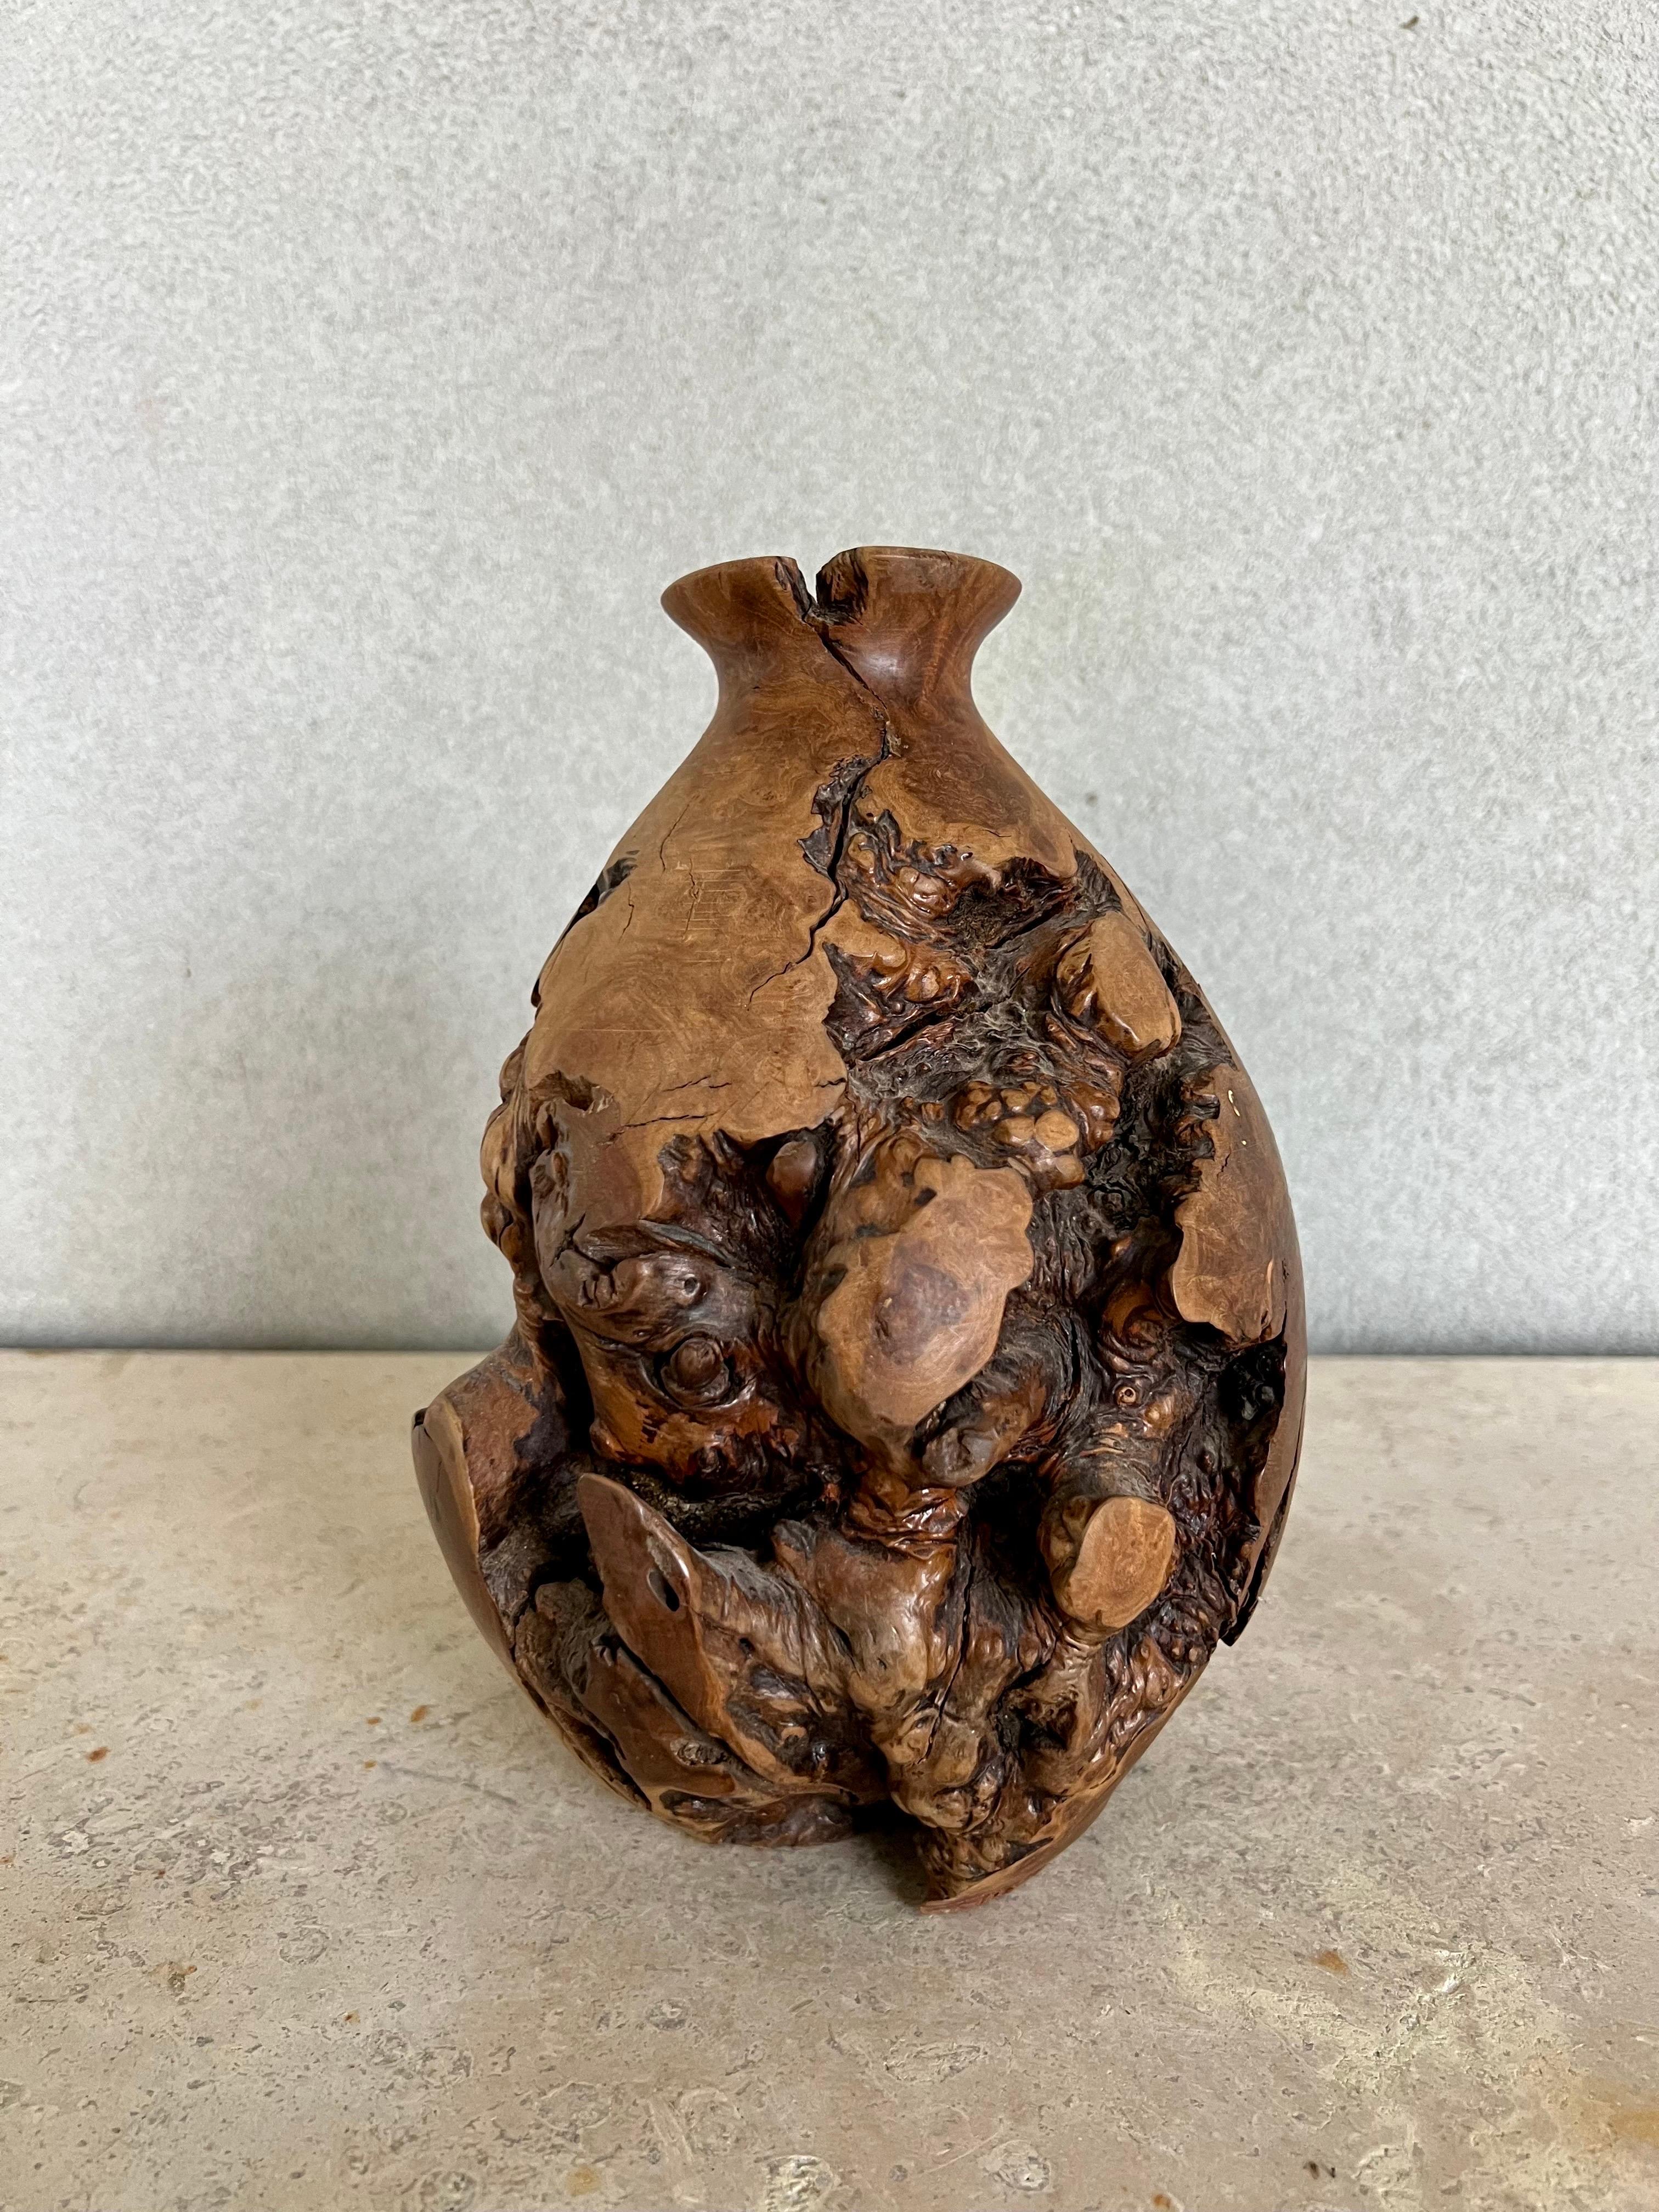 One of a kind hand-turned wooden vase handcrafted from manzanita root. Signed by unknown artist on the bottom.